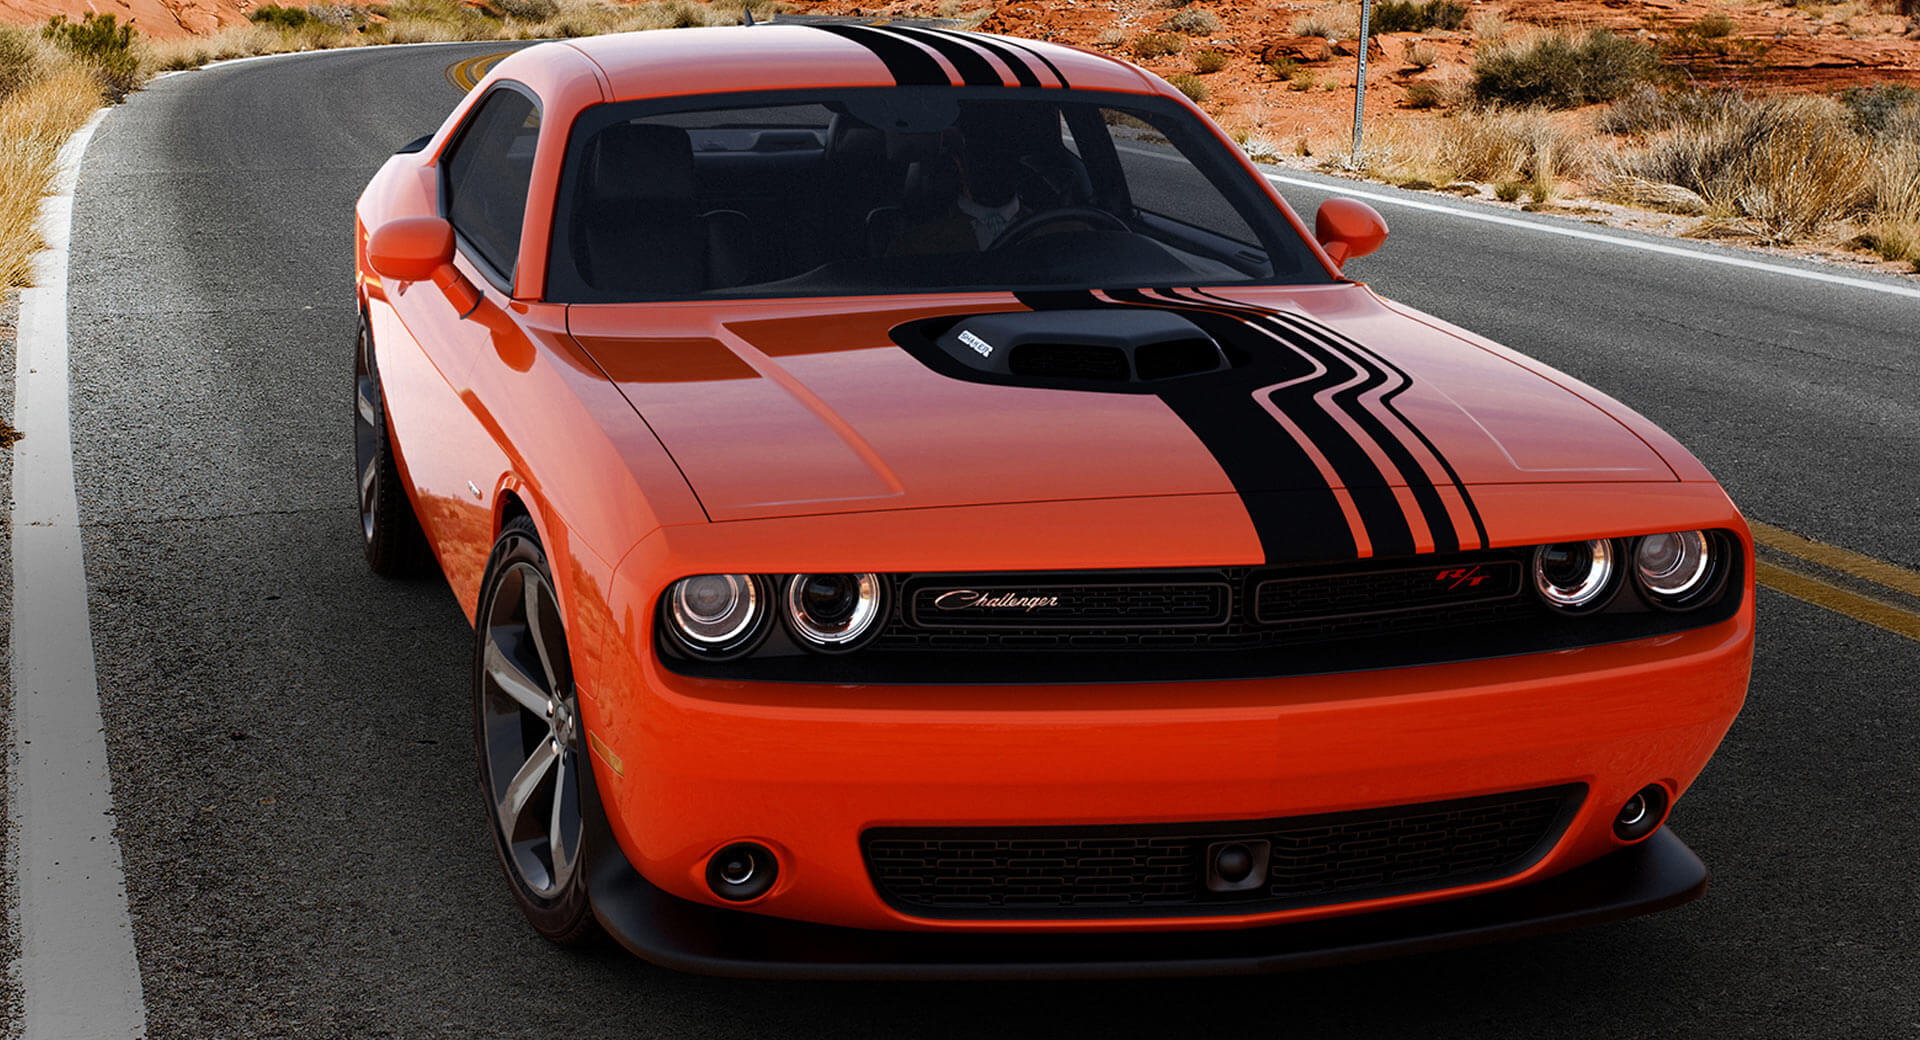 Dodge Launches Year of Special Editions with Challenger Shakedown